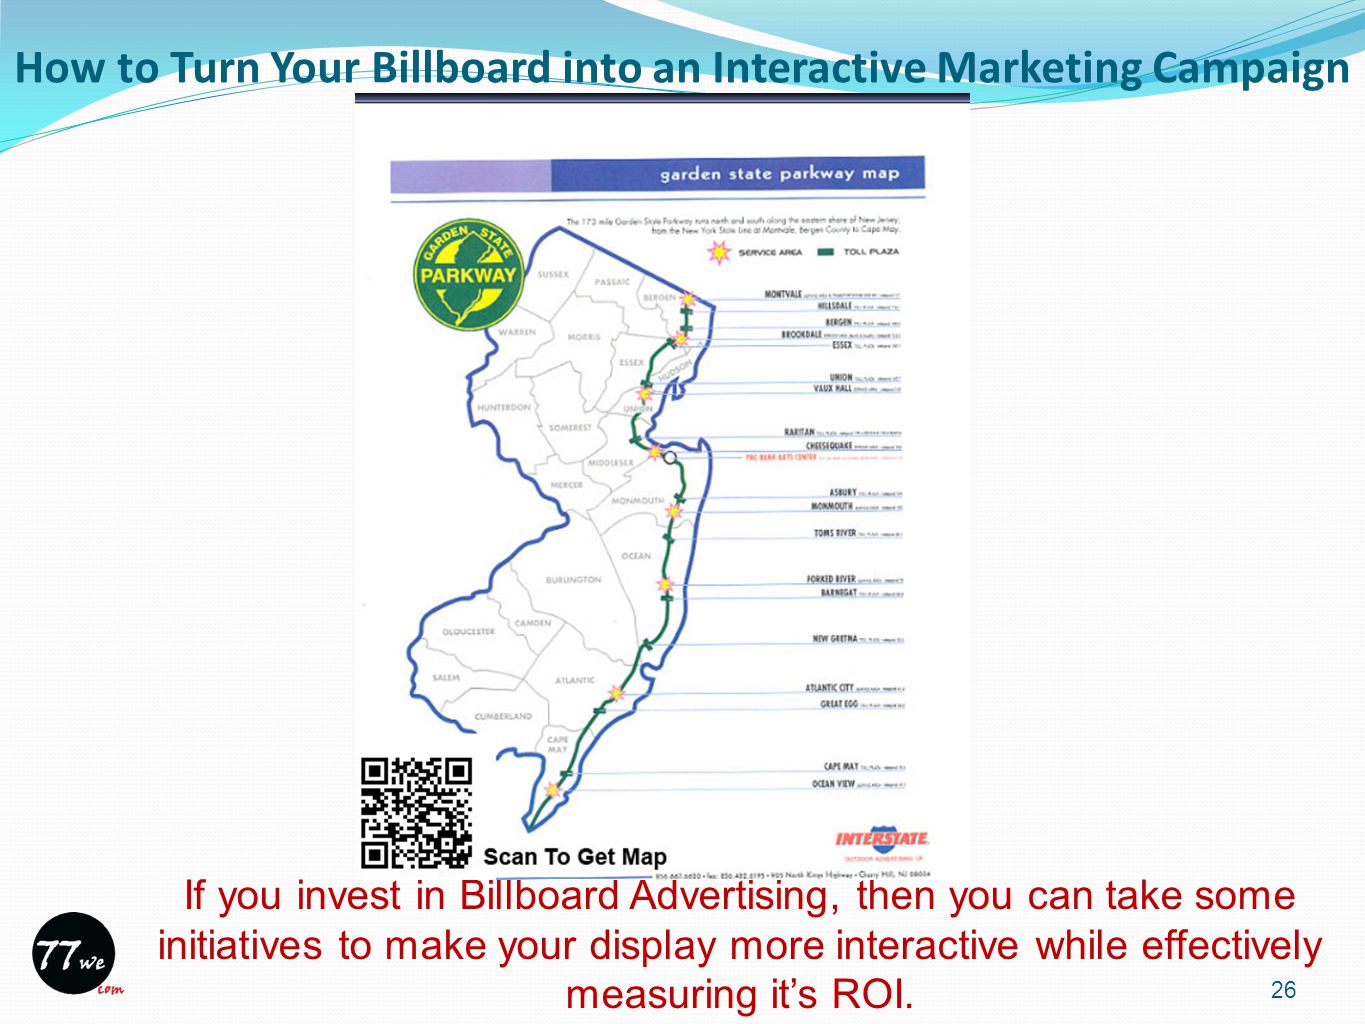 How to Turn Your Billboard into an Interactive Marketing Campaign and Measure ROI 26 If you invest in Billboard Advertising, then you can take some initiatives to make your display more interactive while effectively measuring it’s ROI.